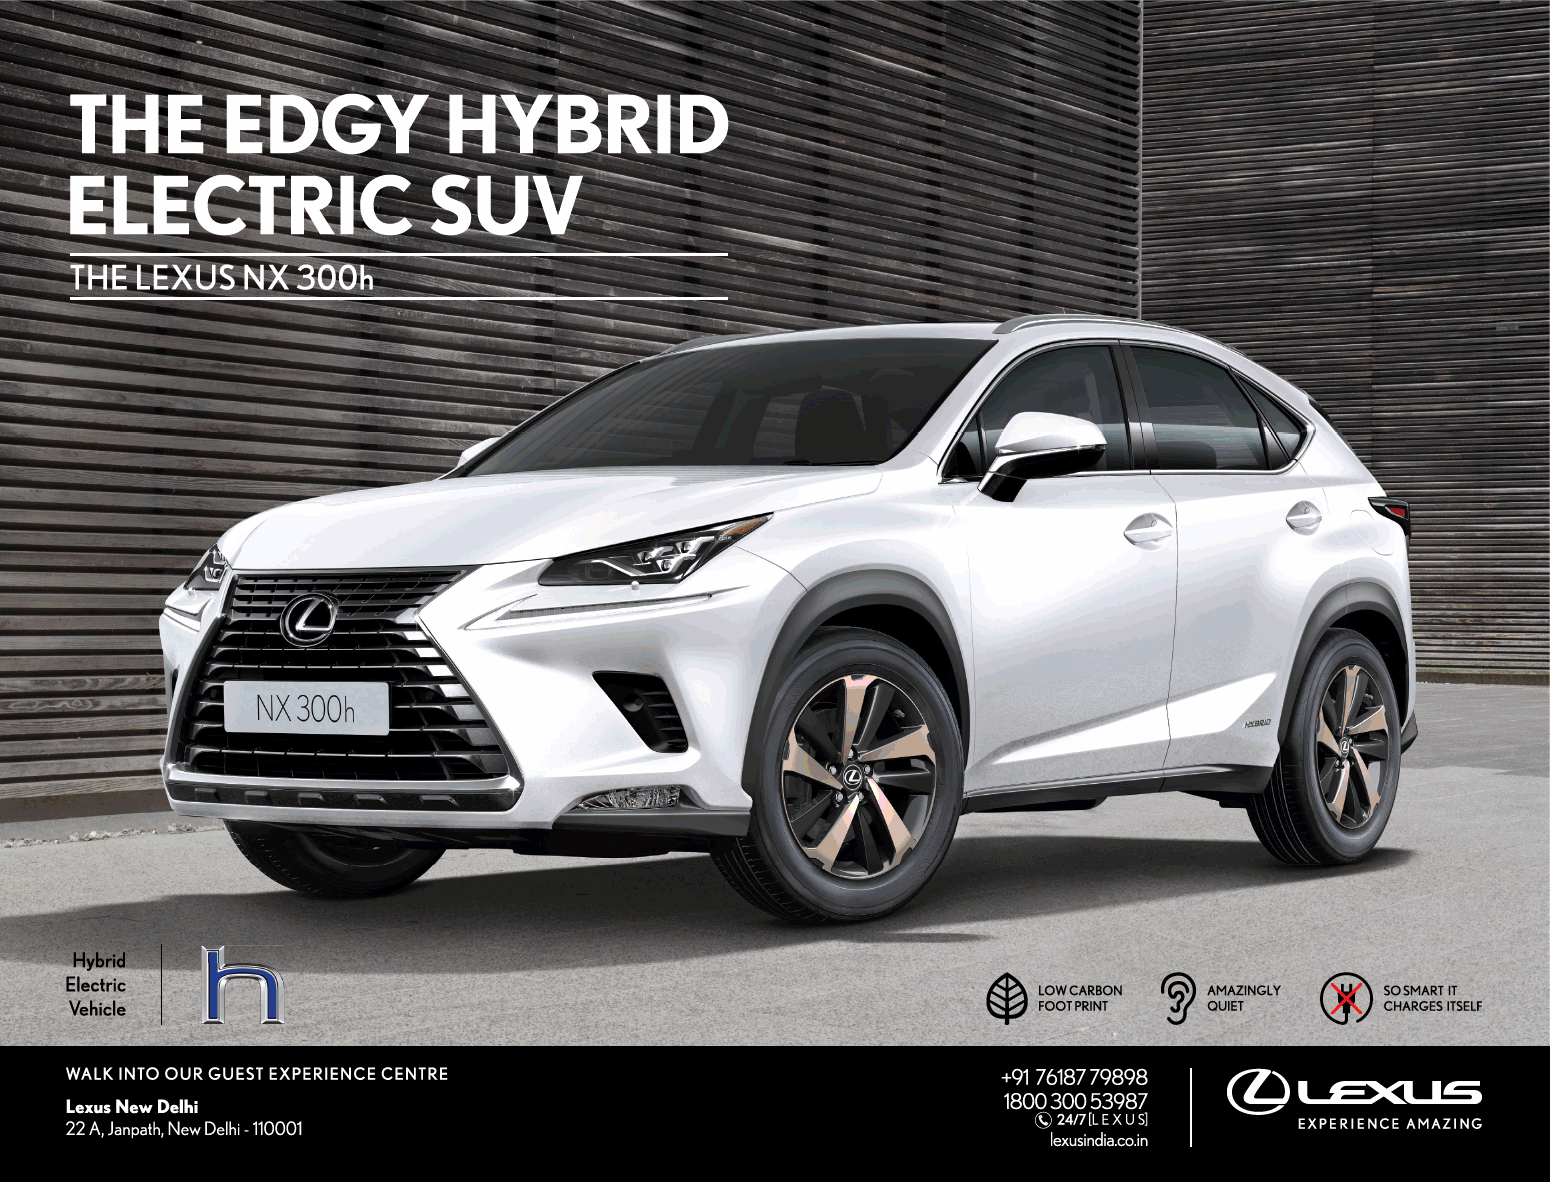 lexus-the-edgy-hybrid-electric-suv-ad-delhi-times-27-03-2019.png